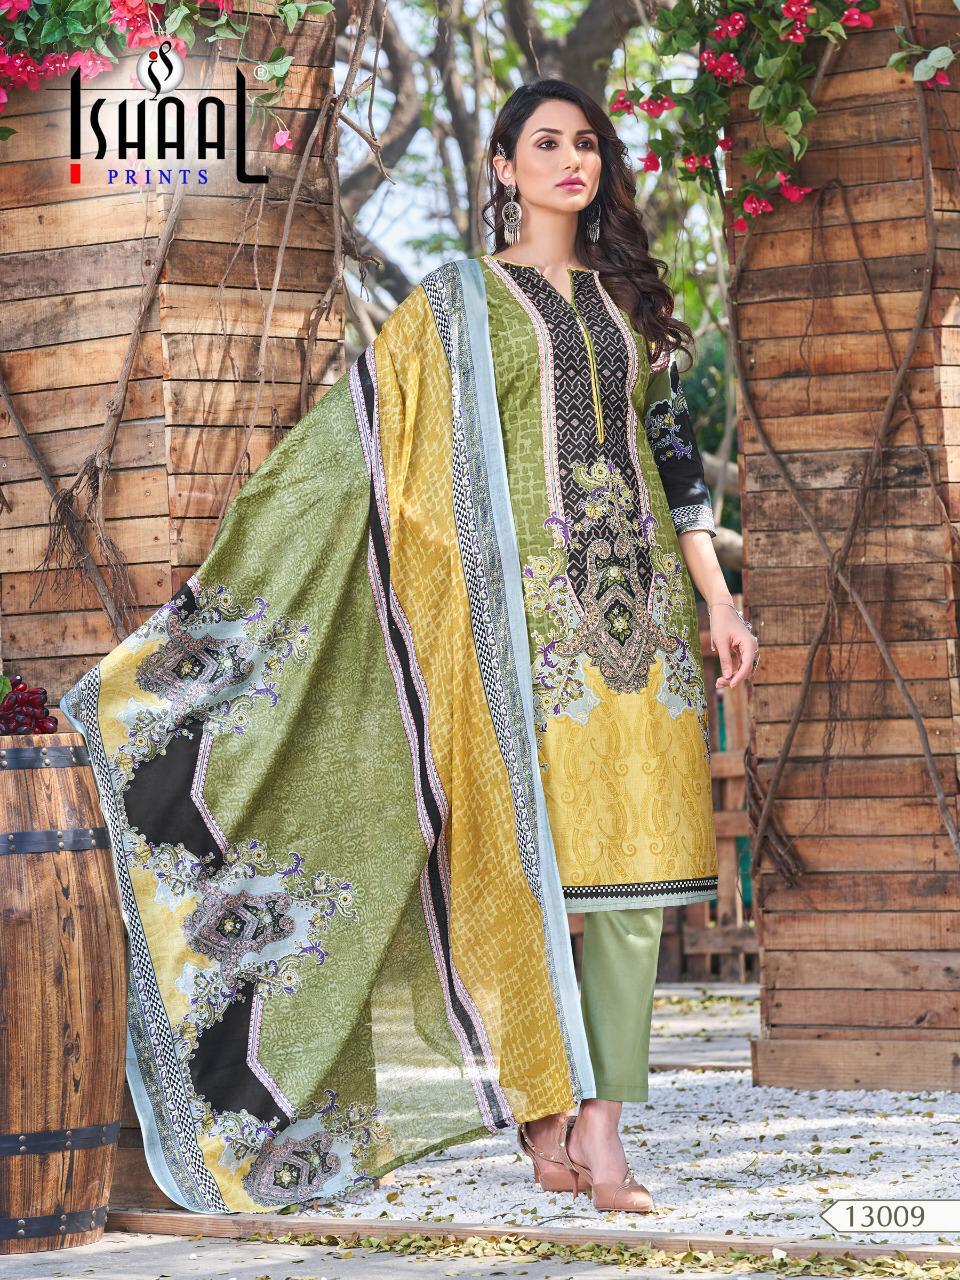 Gulmohar Vol-13 Ishaal Prints 13001-13010 Series  Pure Lawn Prints Dress Material Wholesale Collection From Surat